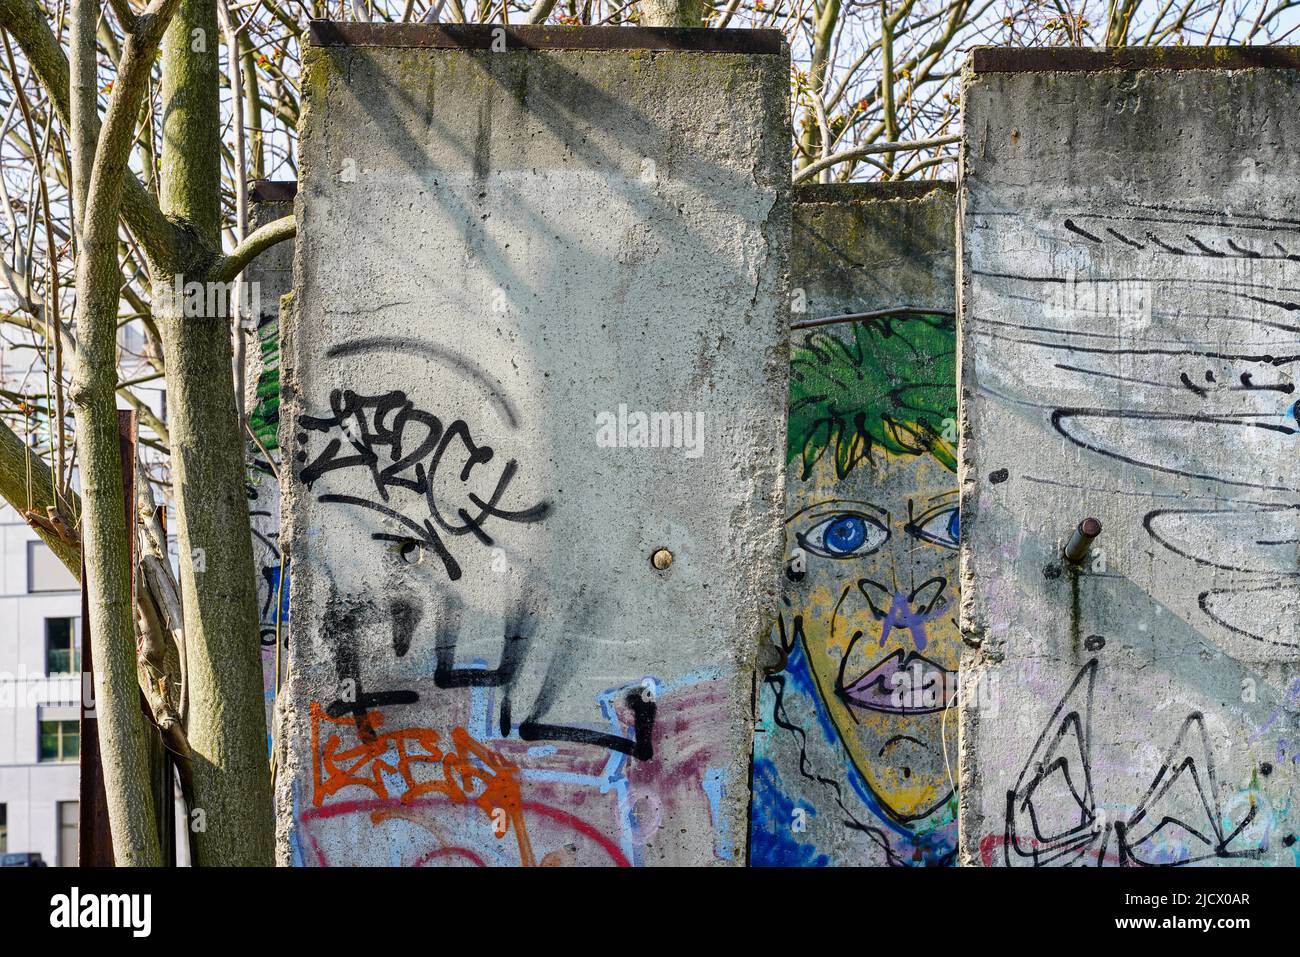 The Berlin Wall Memorial on Bernauer Strasse with a 60 meter long section of the former border, Berlin, Germany, 2.5.22 Stock Photo